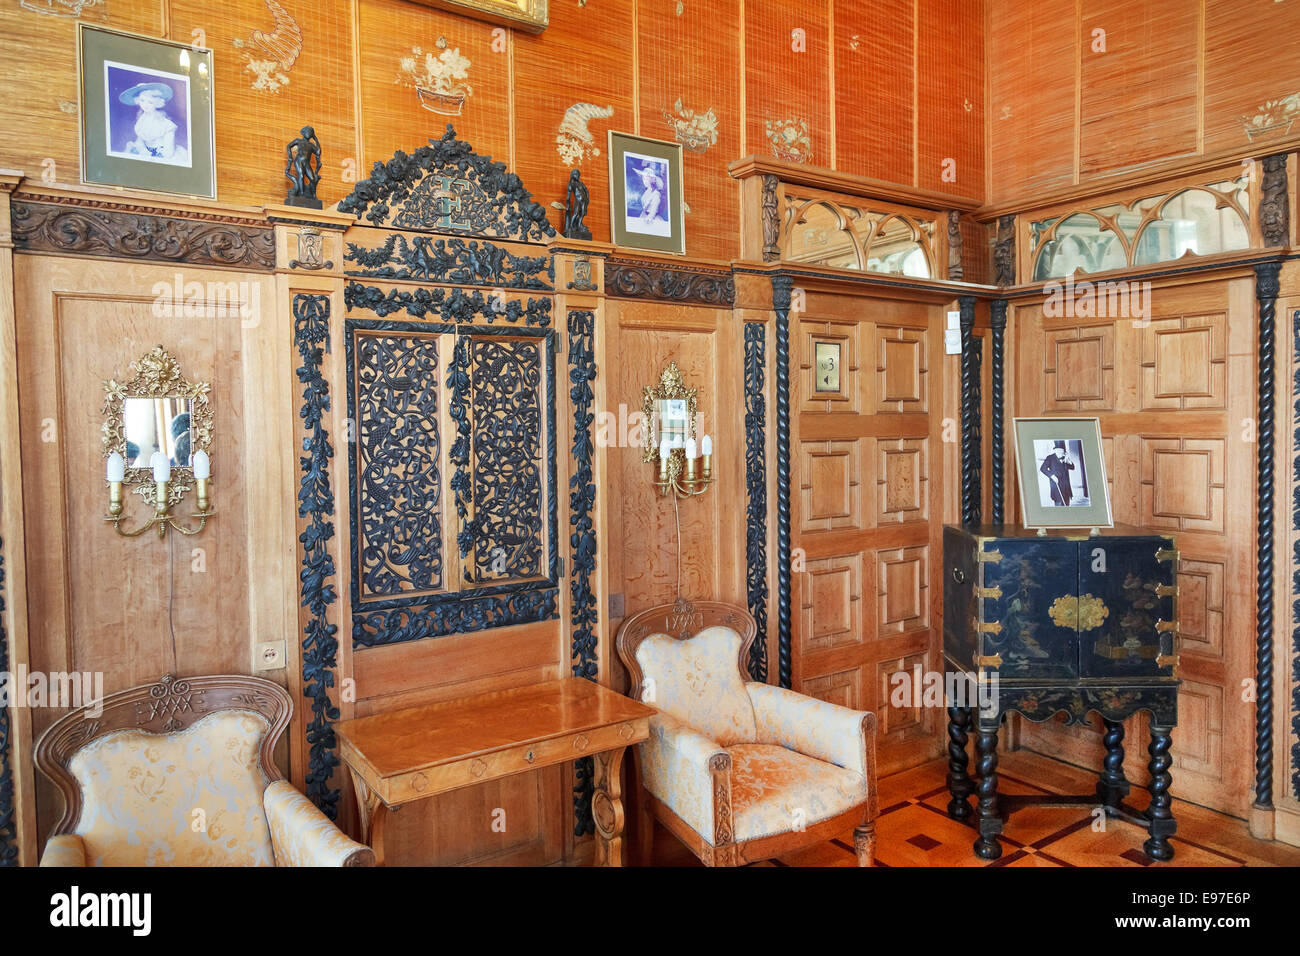 ALUPKA, RUSSIA - SEPTEMBER 28, 2014: interior of Chinese cabinet (small living room) in Vorontsov Palace in Crimea. The palace w Stock Photo